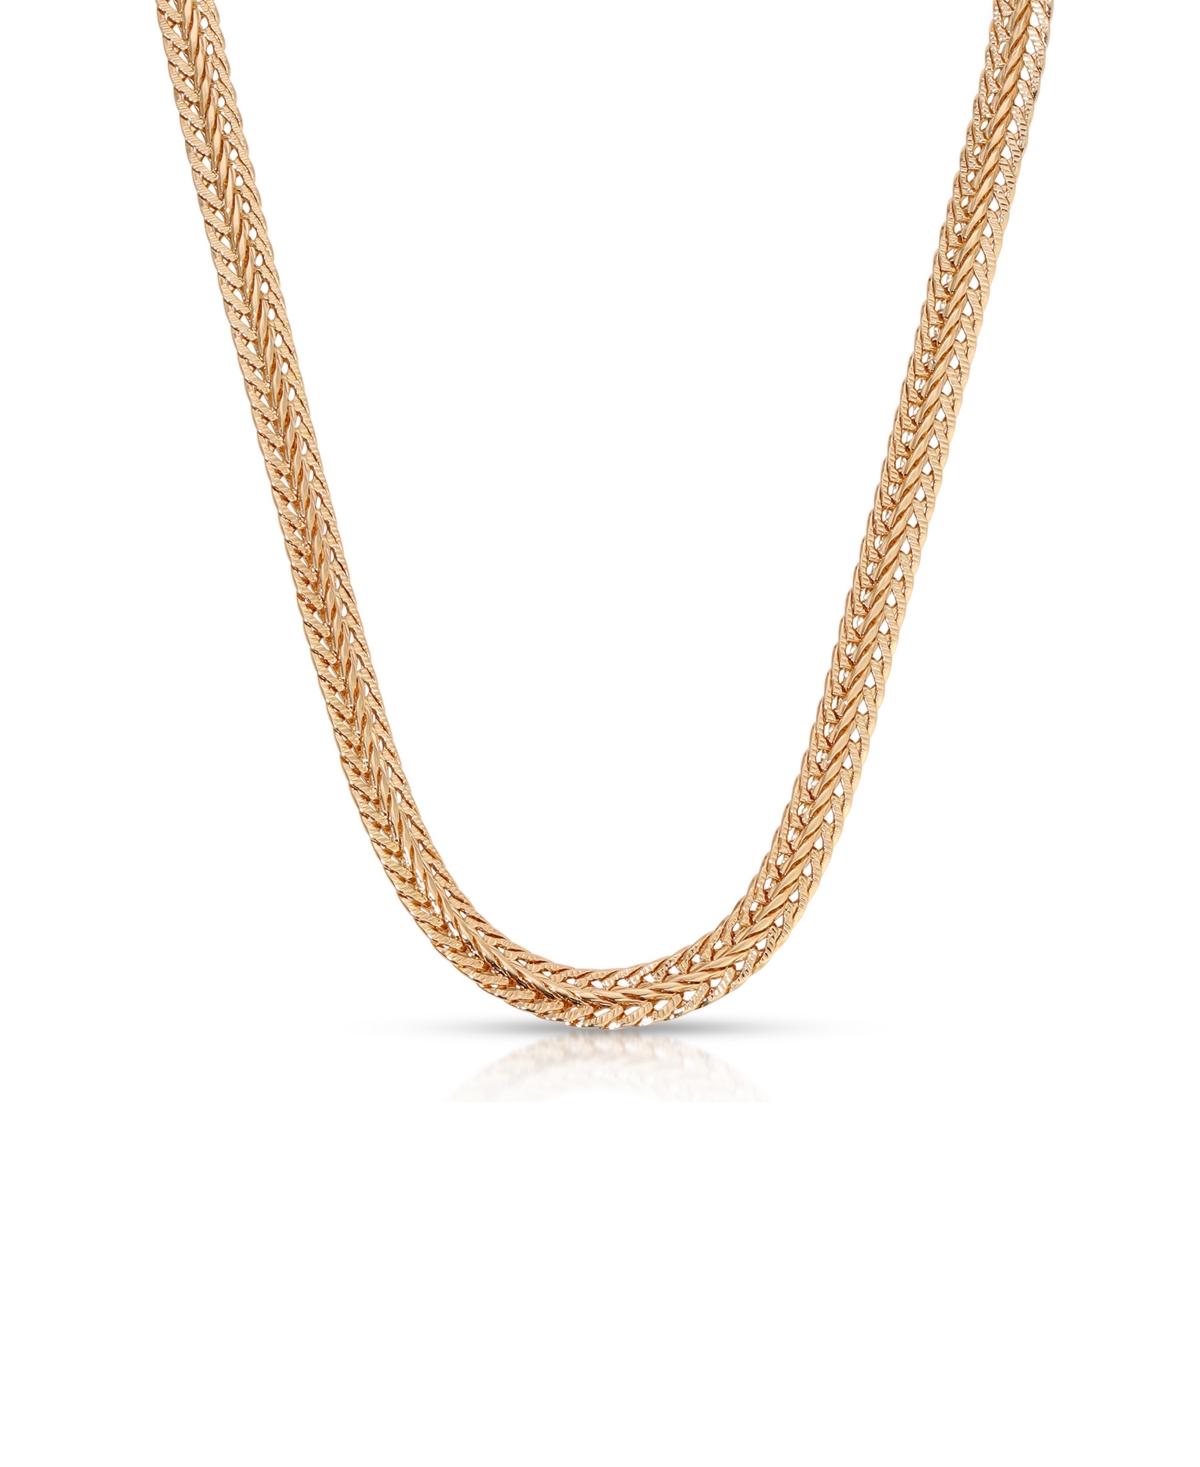 Woven 18k Gold Plated Chain Necklace - Gold